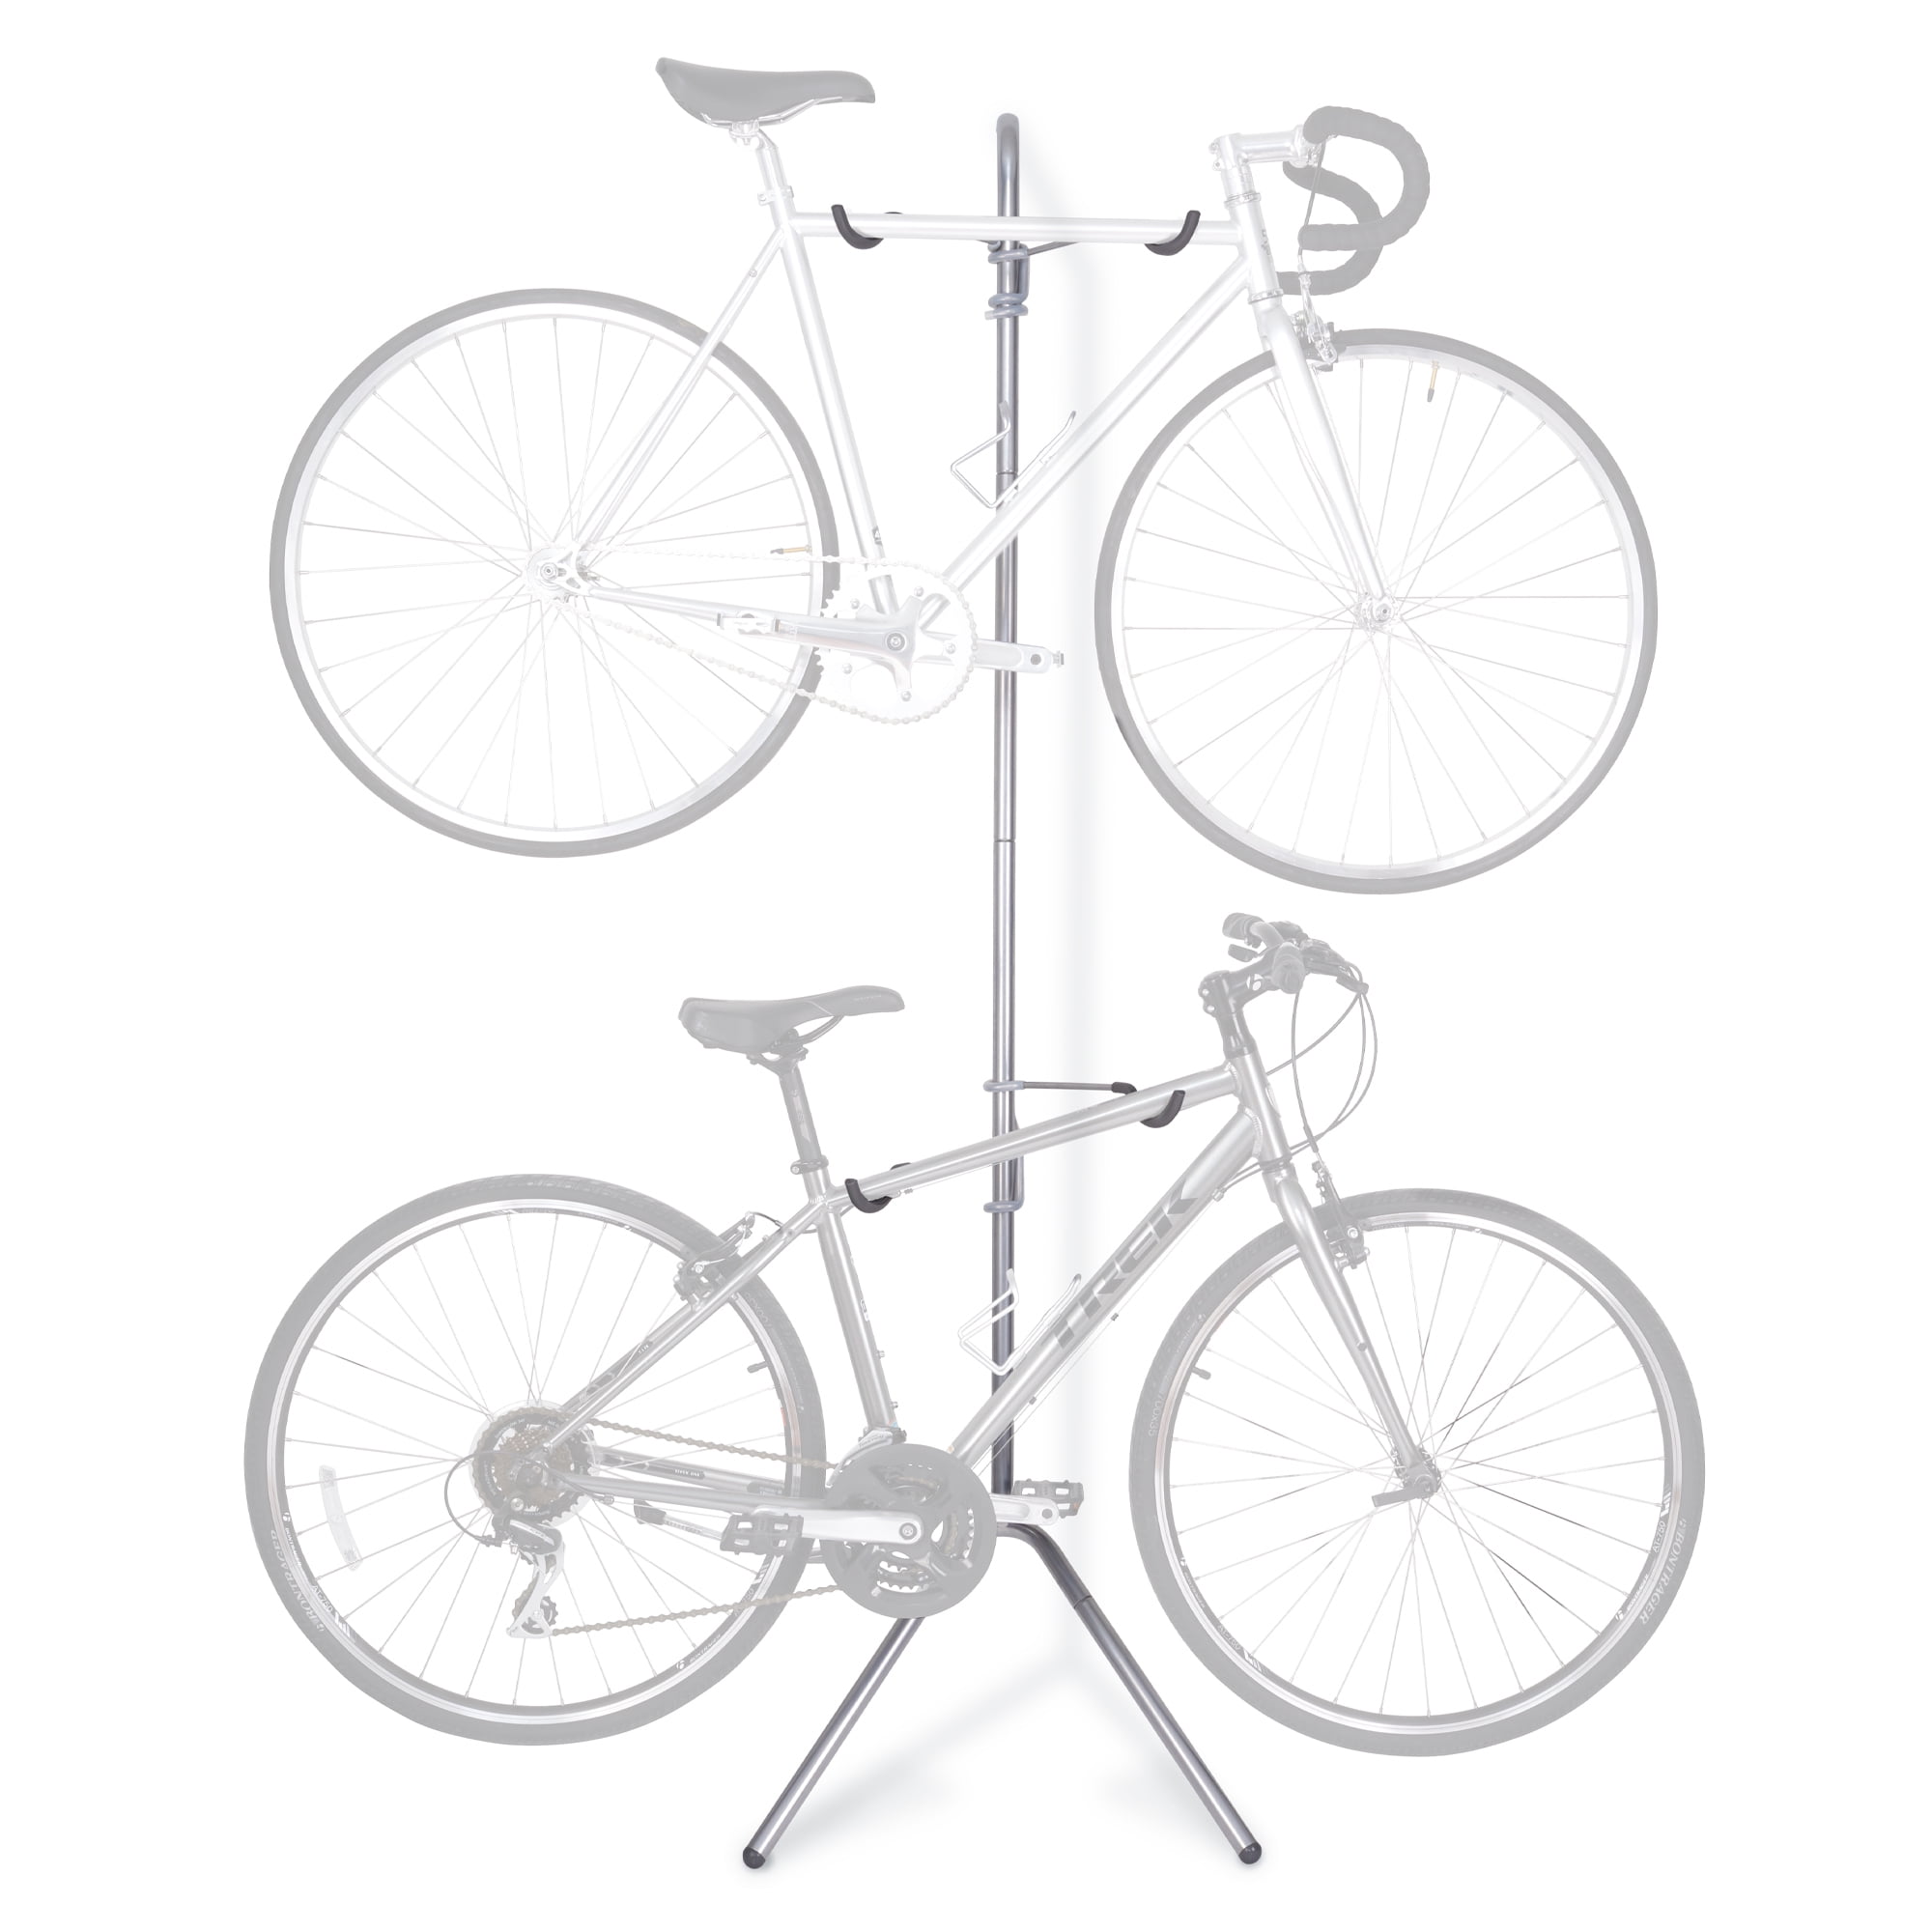 Bicycle Rack for 2 Bikes with Hanging System and Adjustable Arms